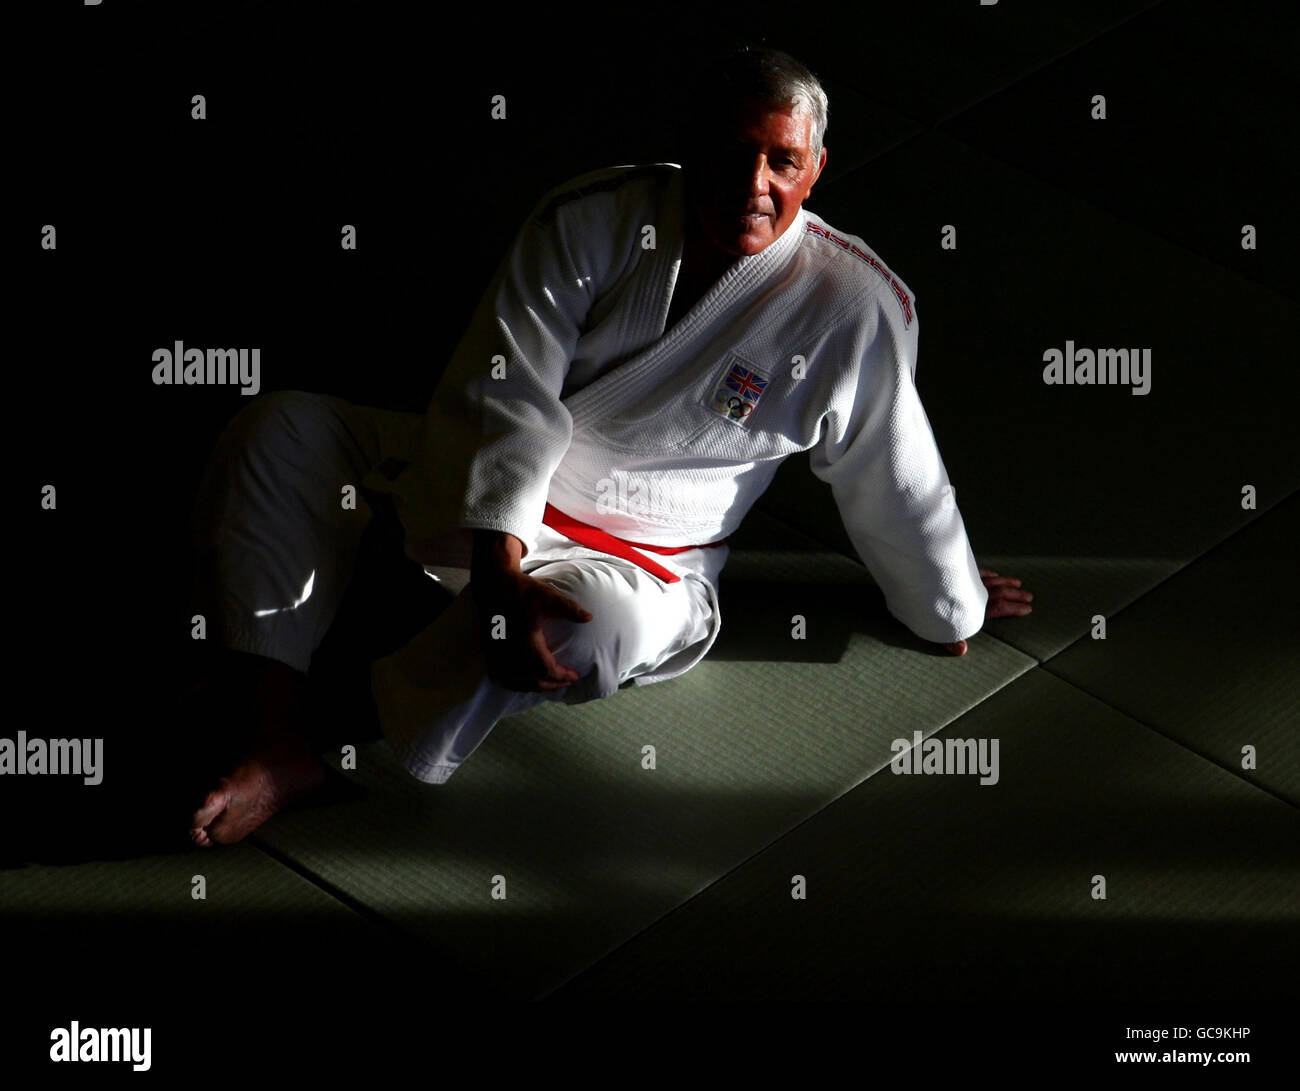 Judo World Masters High Resolution Stock Photography and Images - Alamy